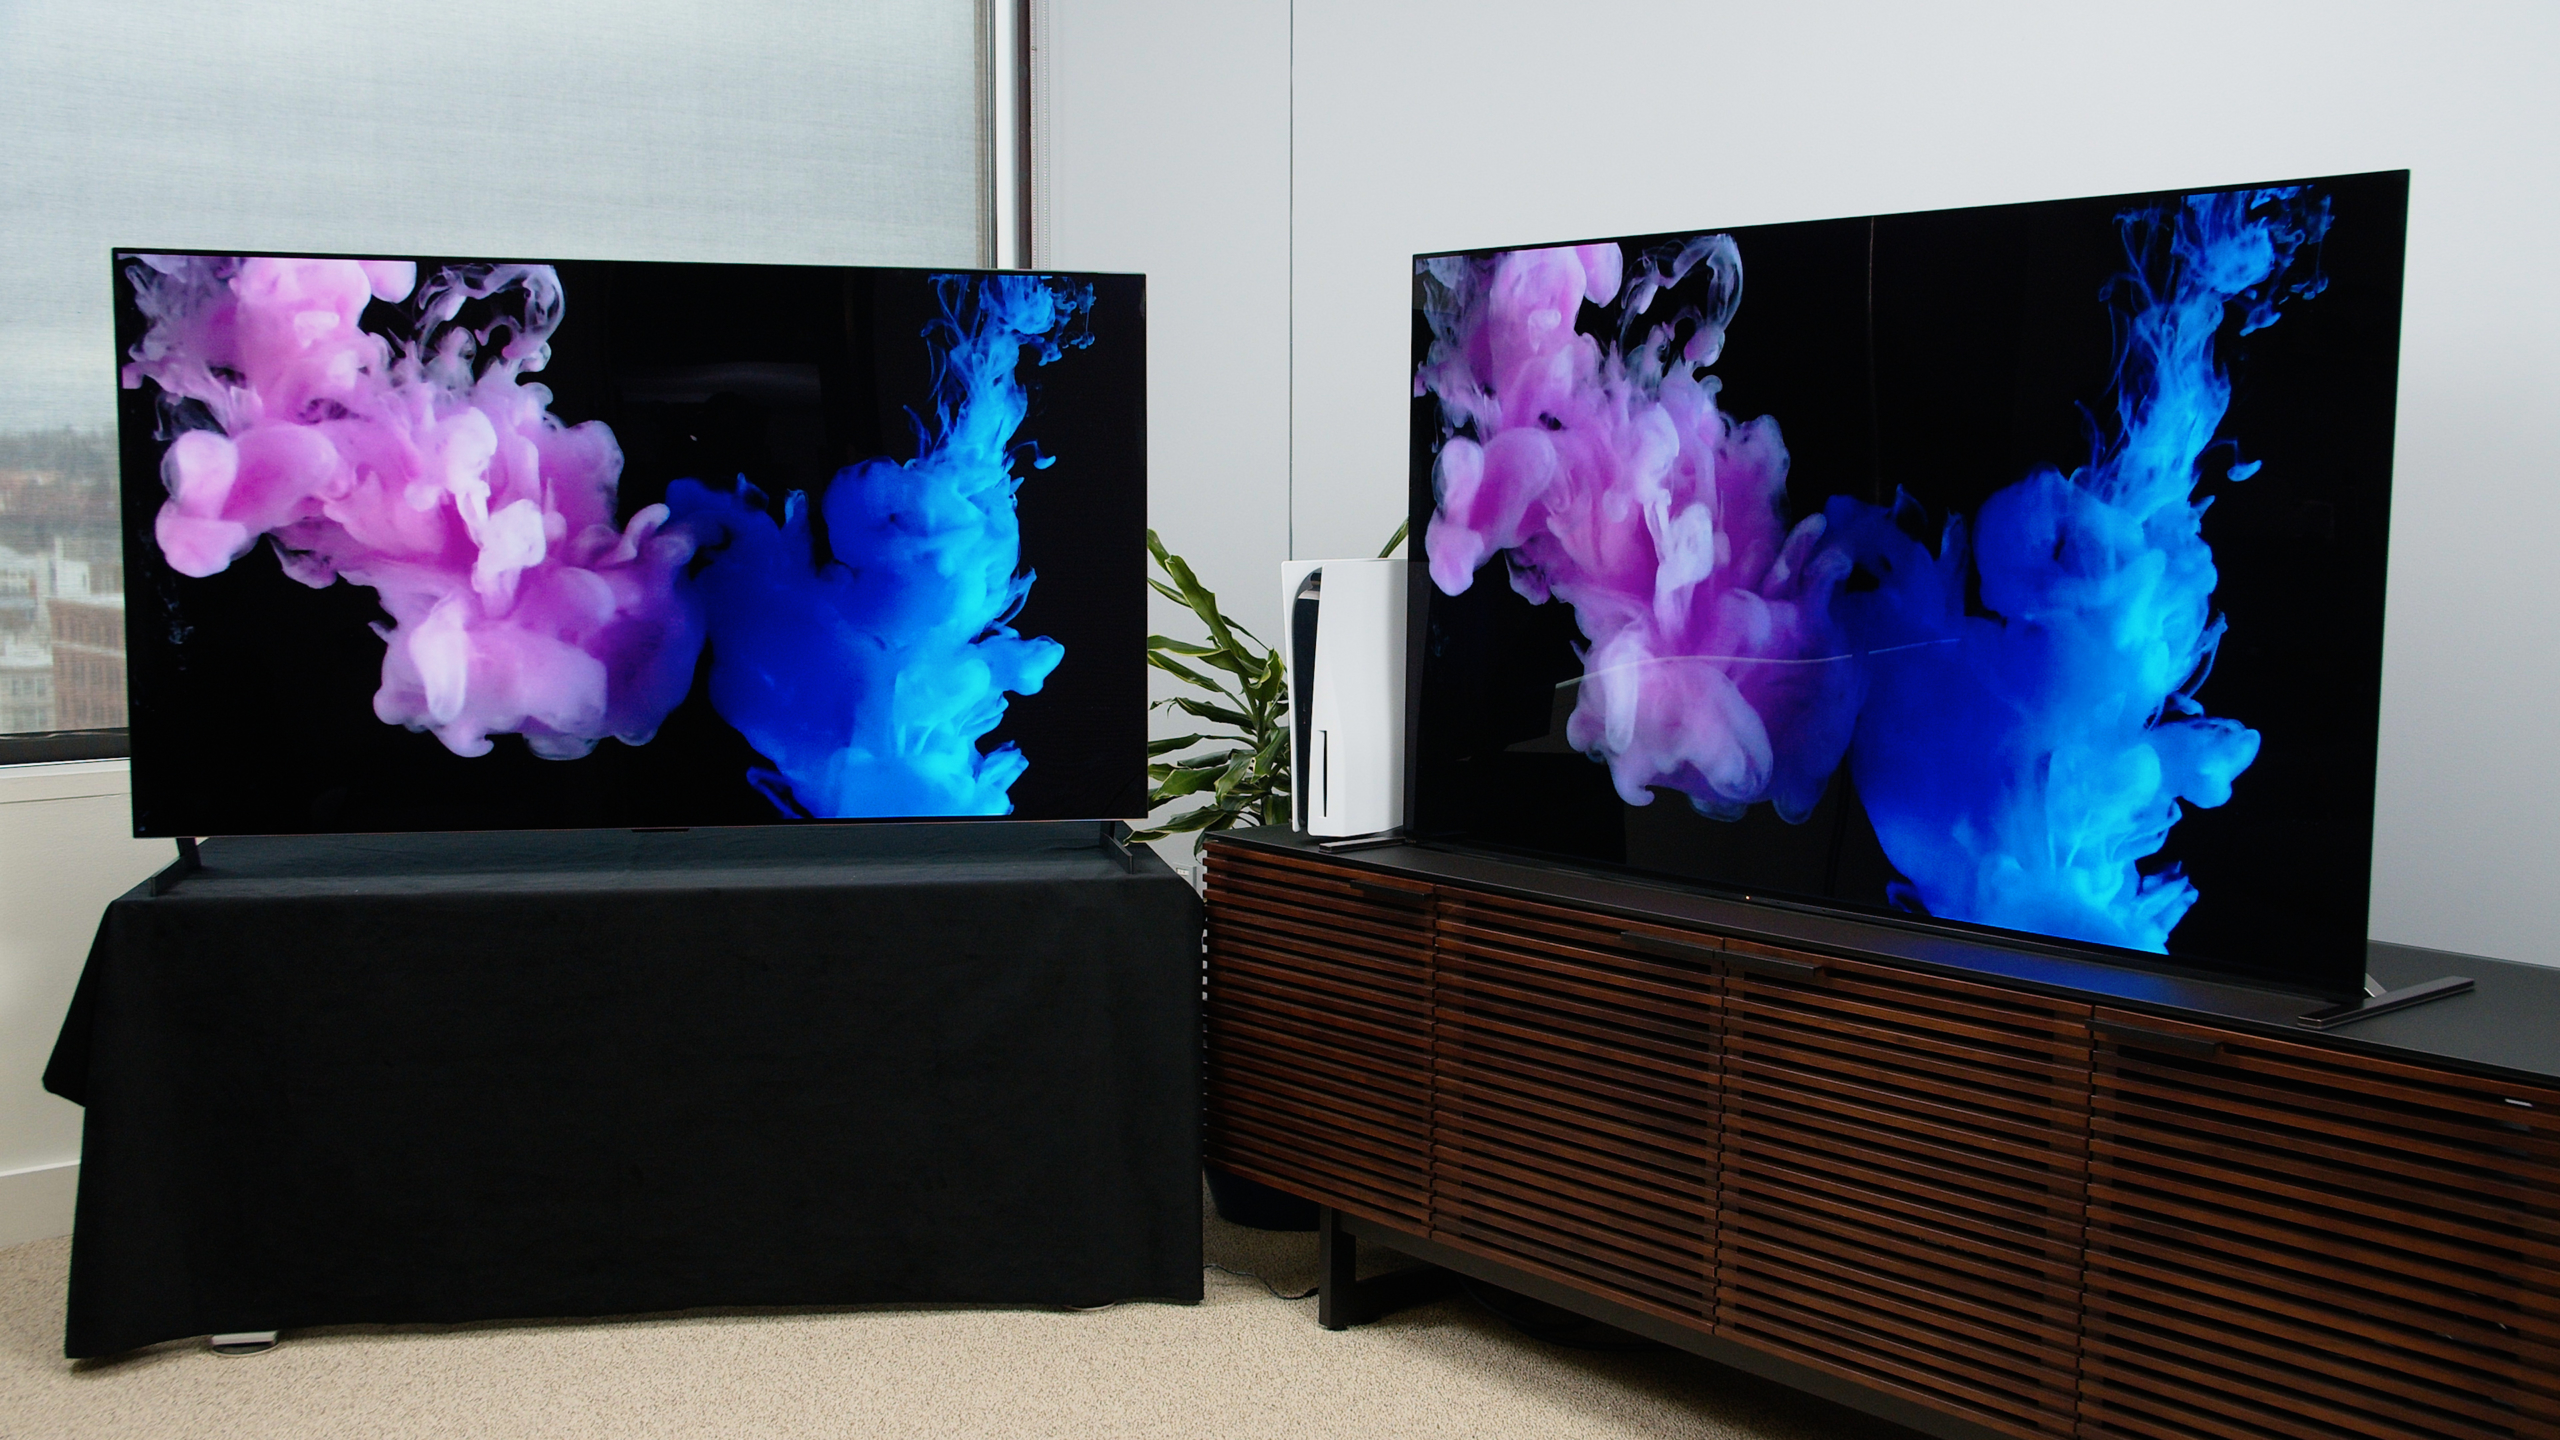 We just tested the Sony A95L OLED TV — here's how it stacks up to Samsung's  and LG's best